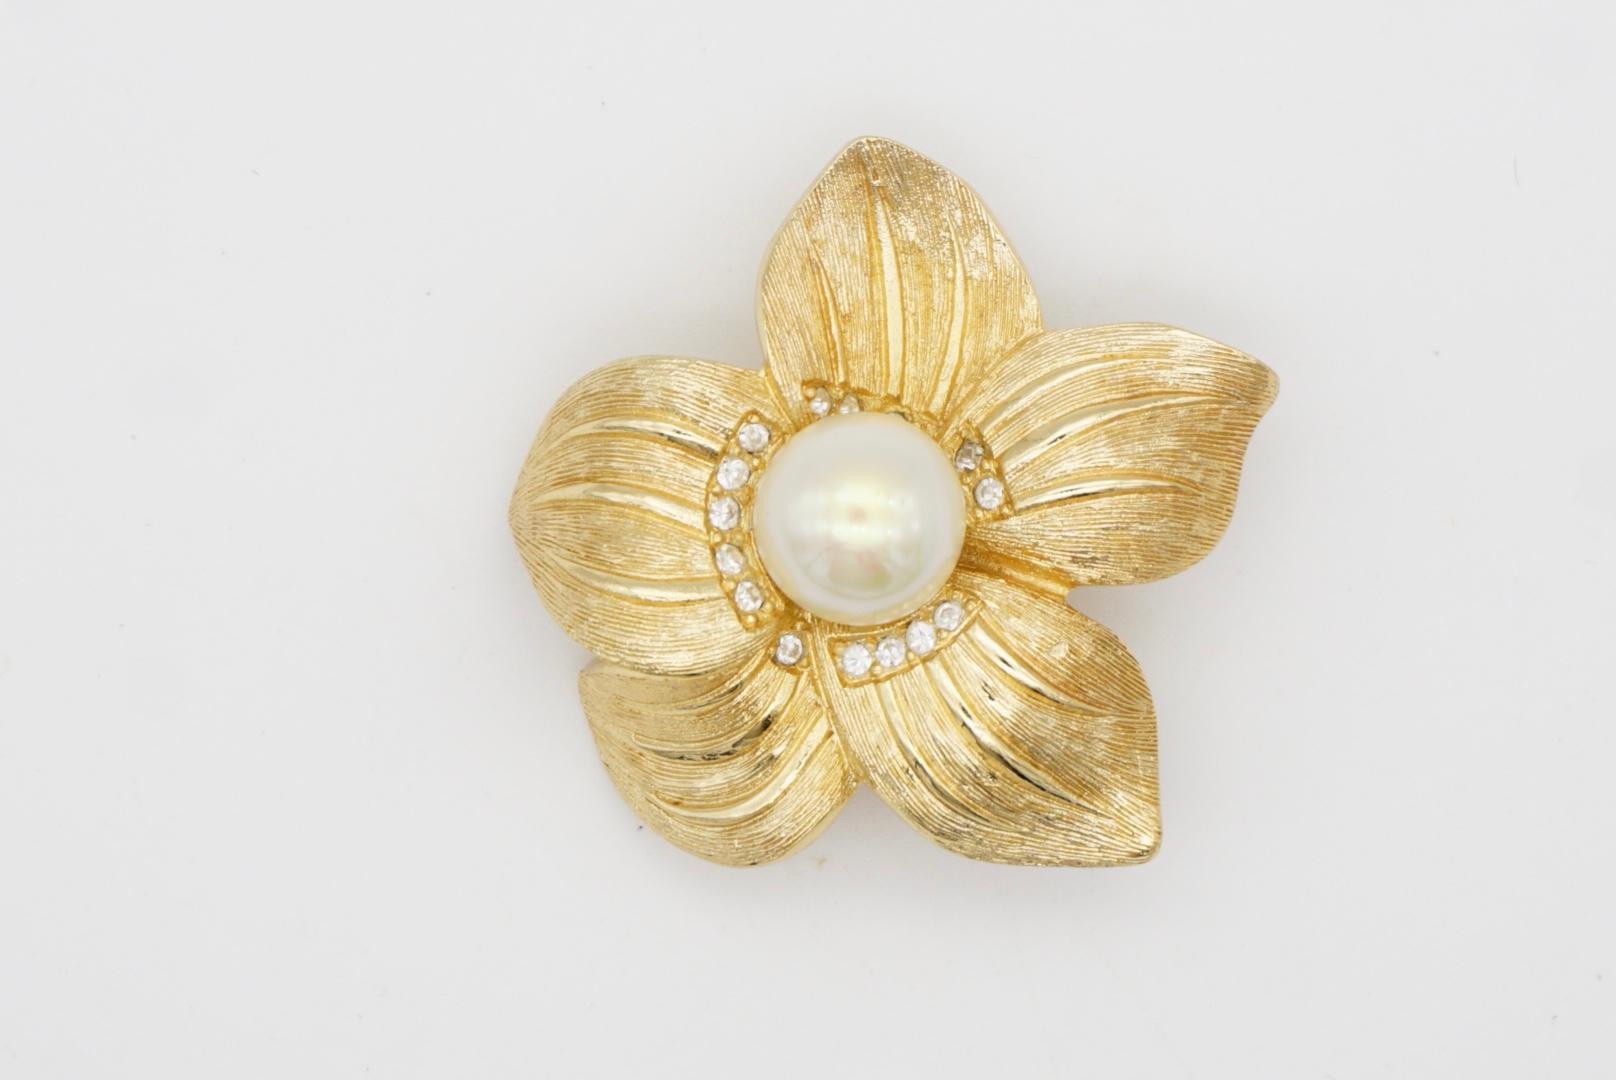 Christian Dior 1980s Vintage Wavy Swirl Flower White Pearl Gold Crystals Brooch For Sale 2